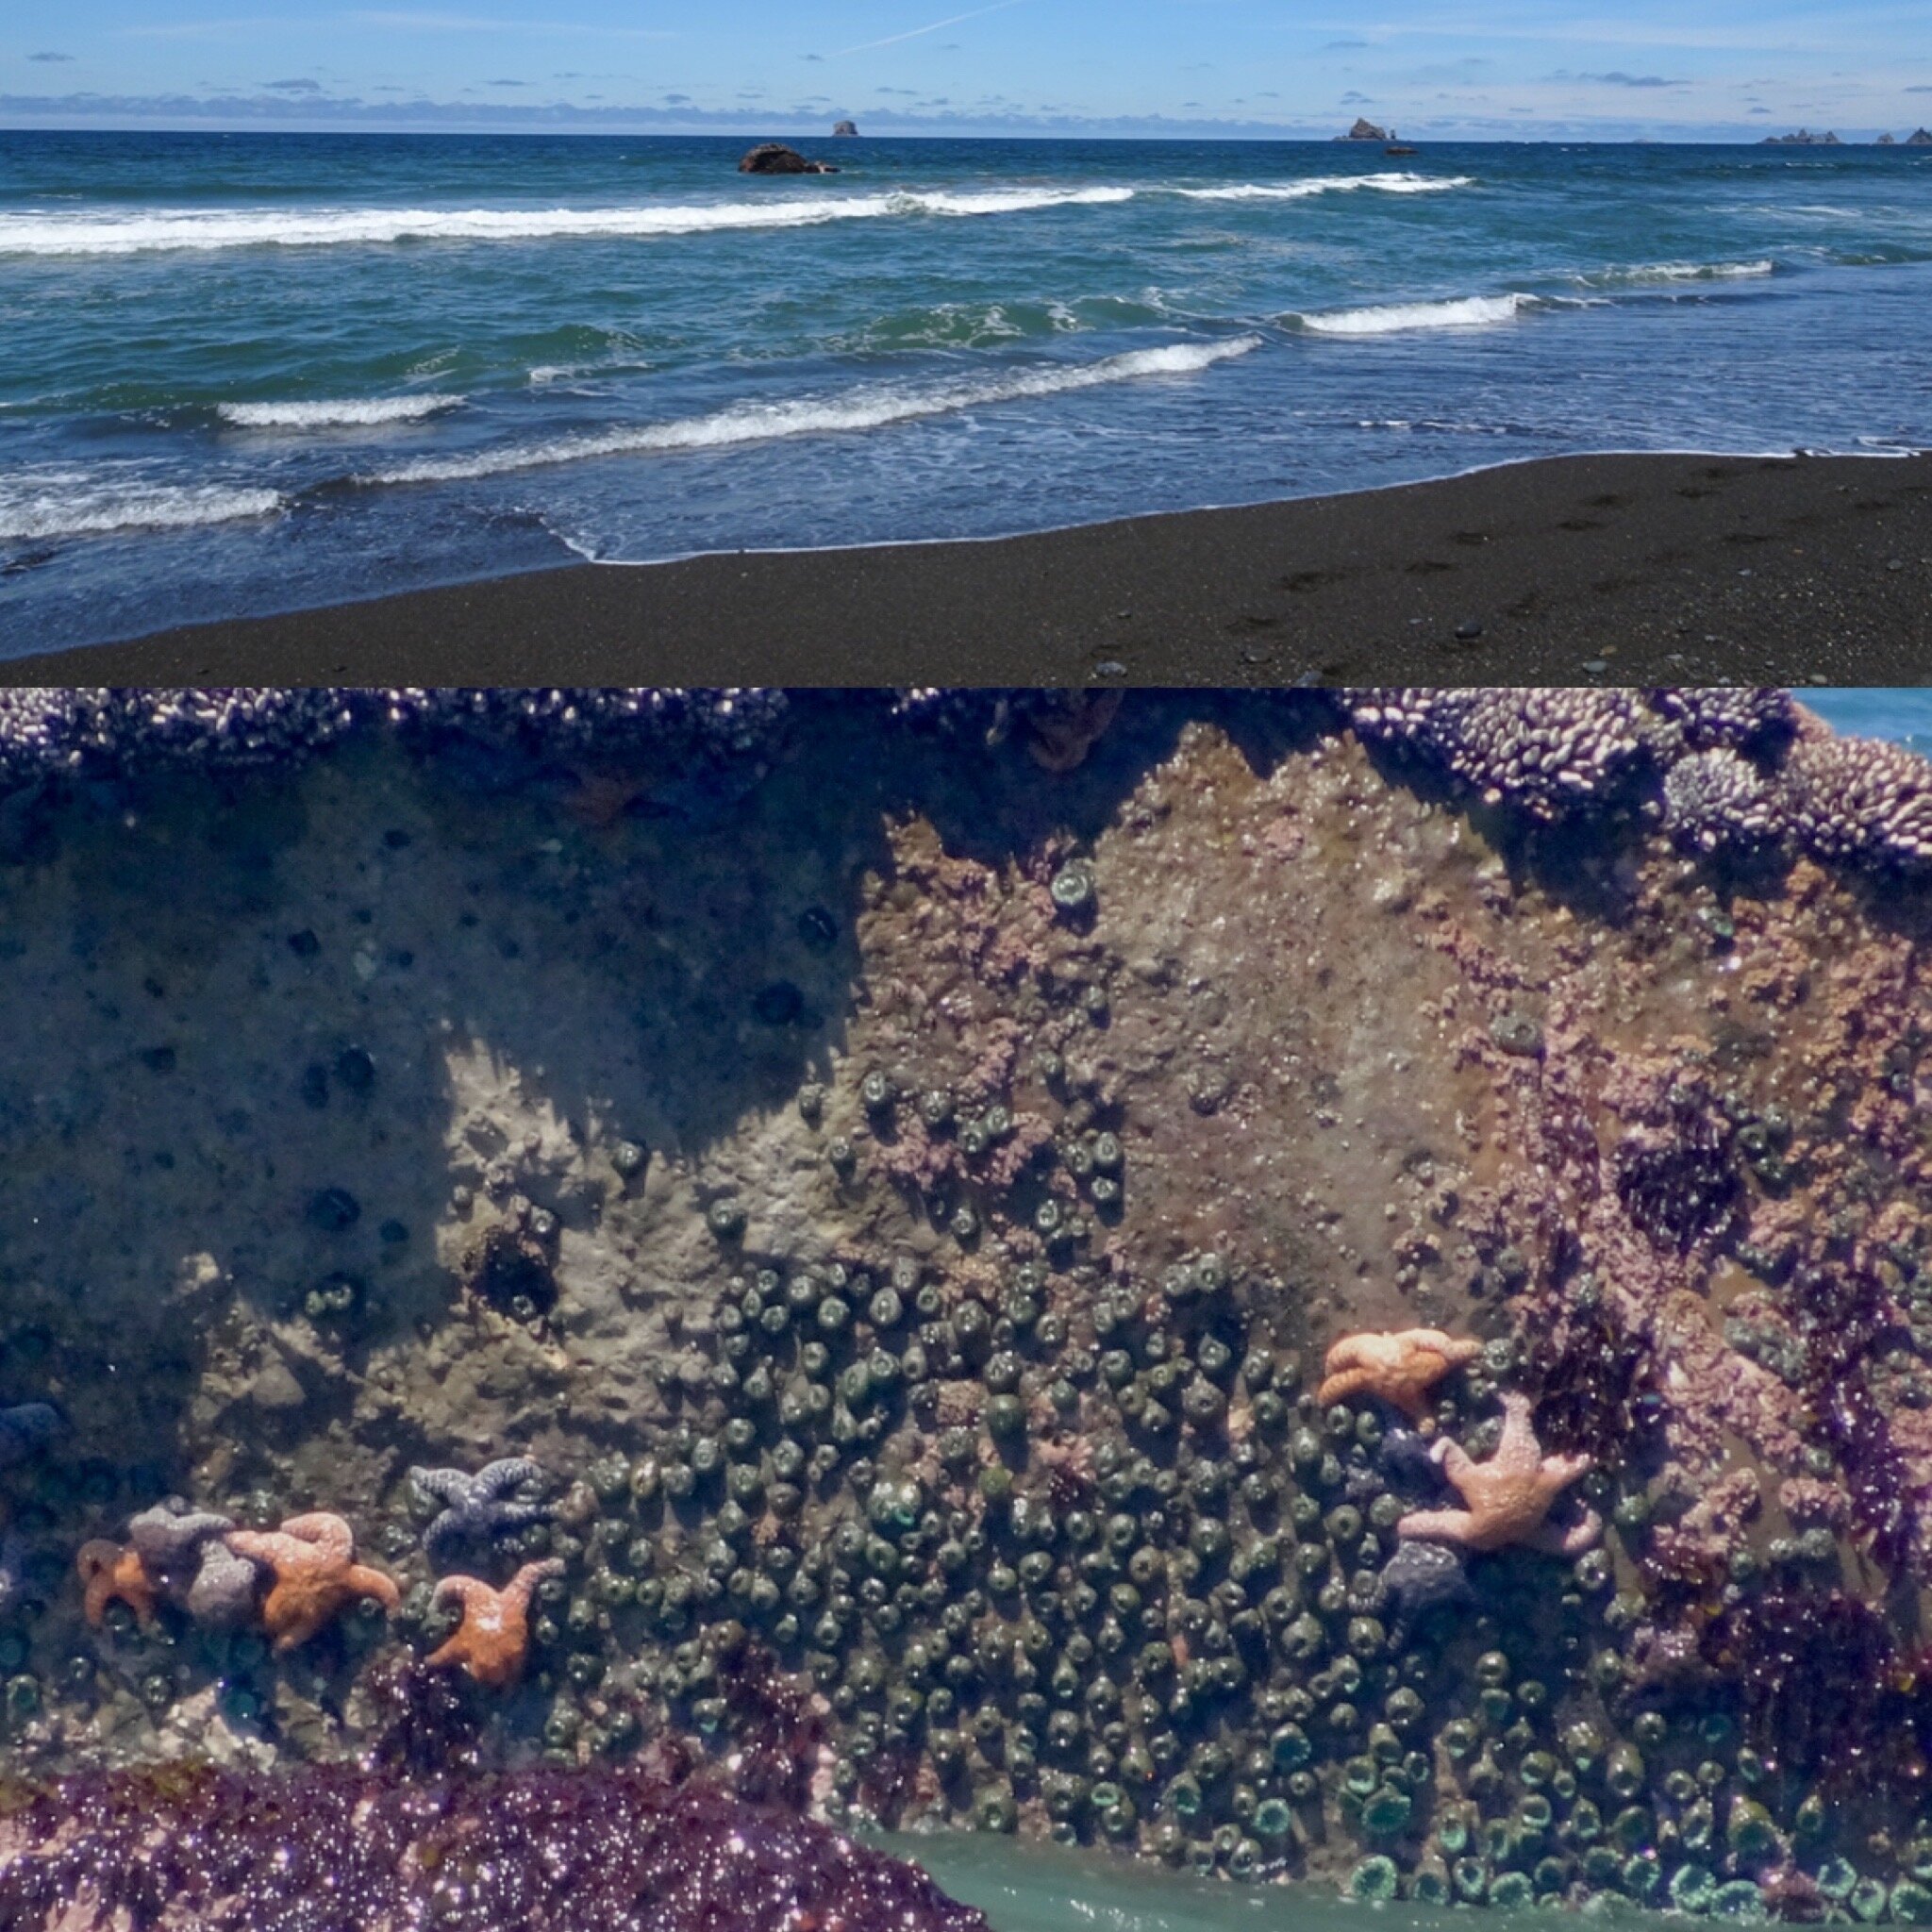 Zoom cameras are crucial. Bunny's young eyes spotted the sea stars on the rock in the forefront of the top pictures... I couldn't see them until I started to zoom in with my camera, but there were quite a few out there as you can see in the lower pic